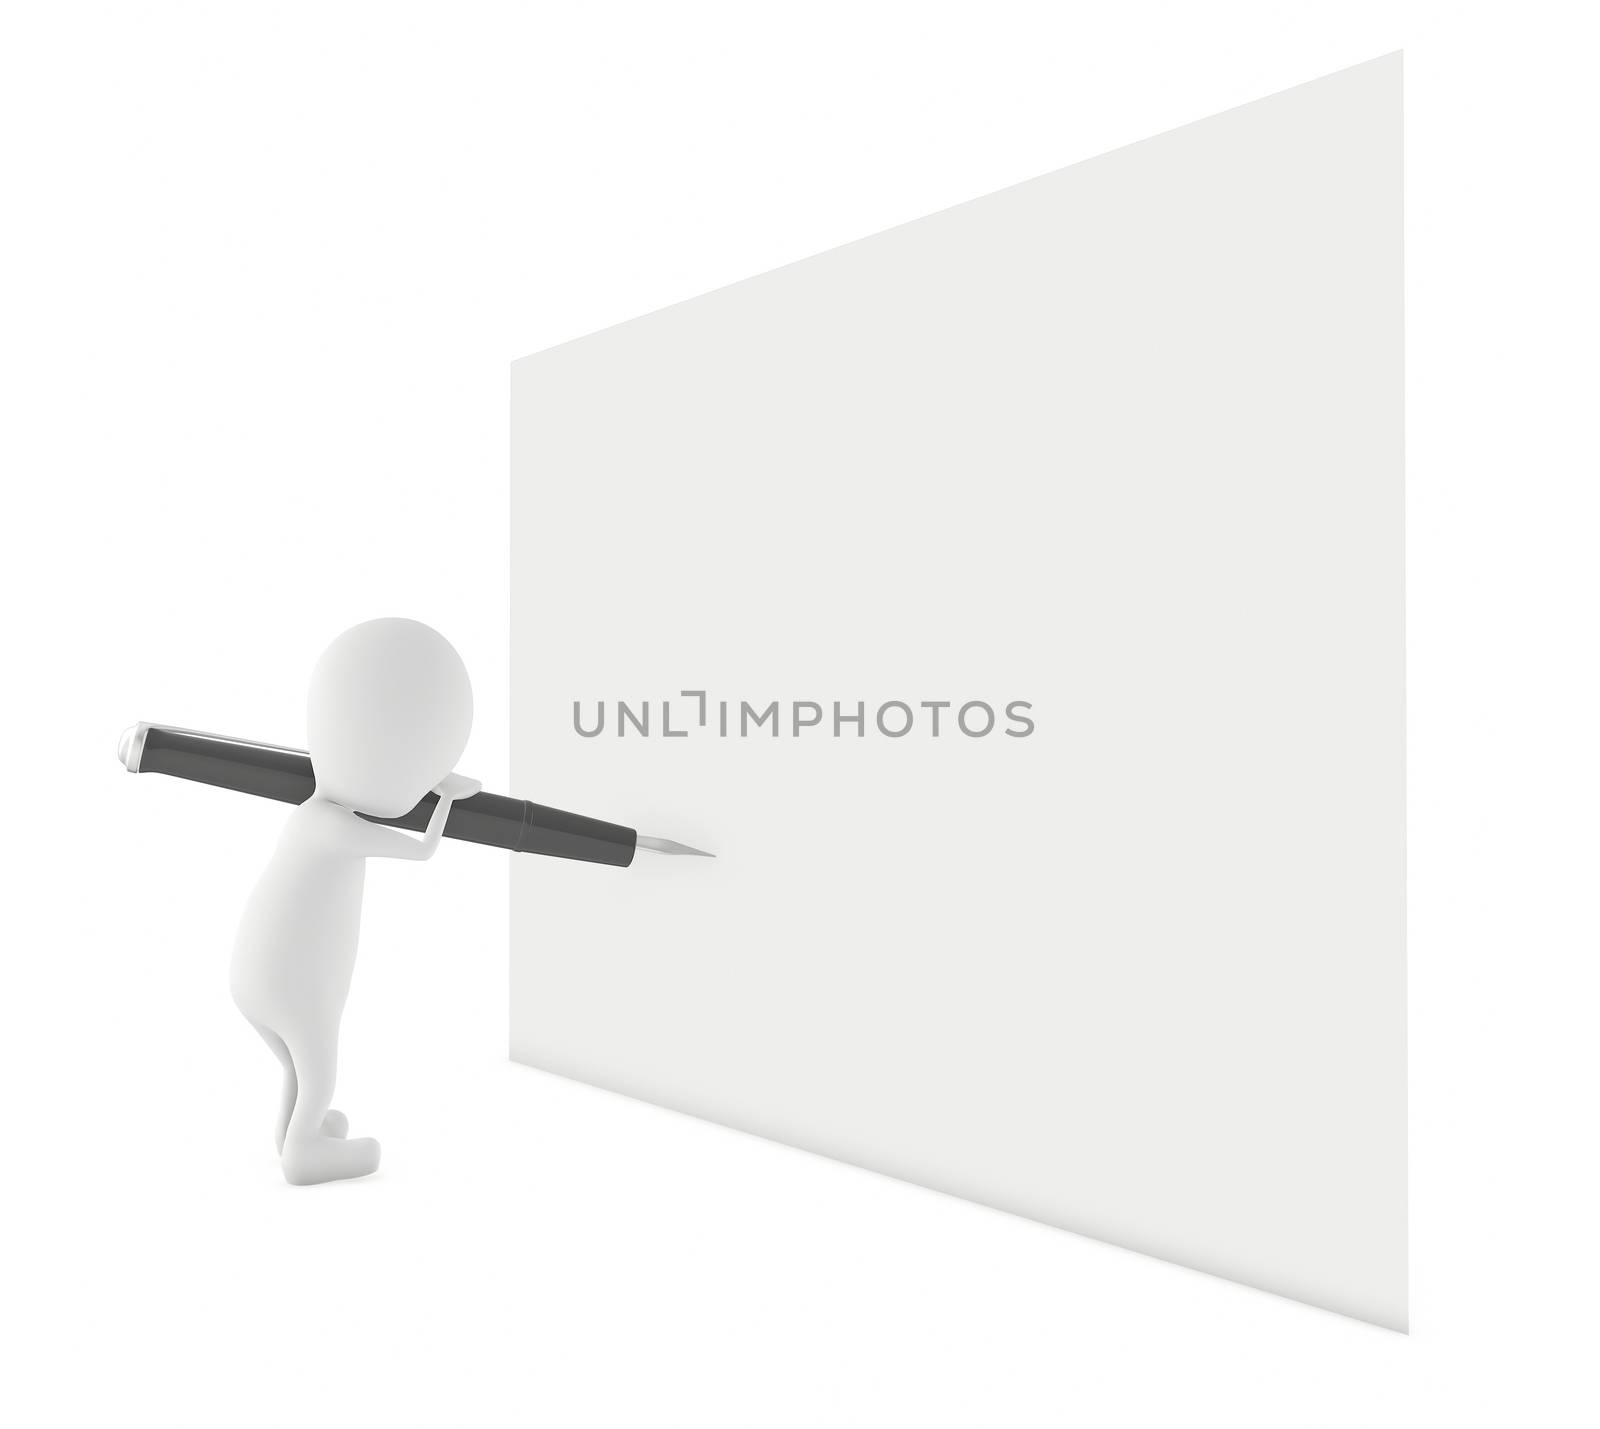 3d character ,holding a pen and writing on a white empty space - 3d rendering